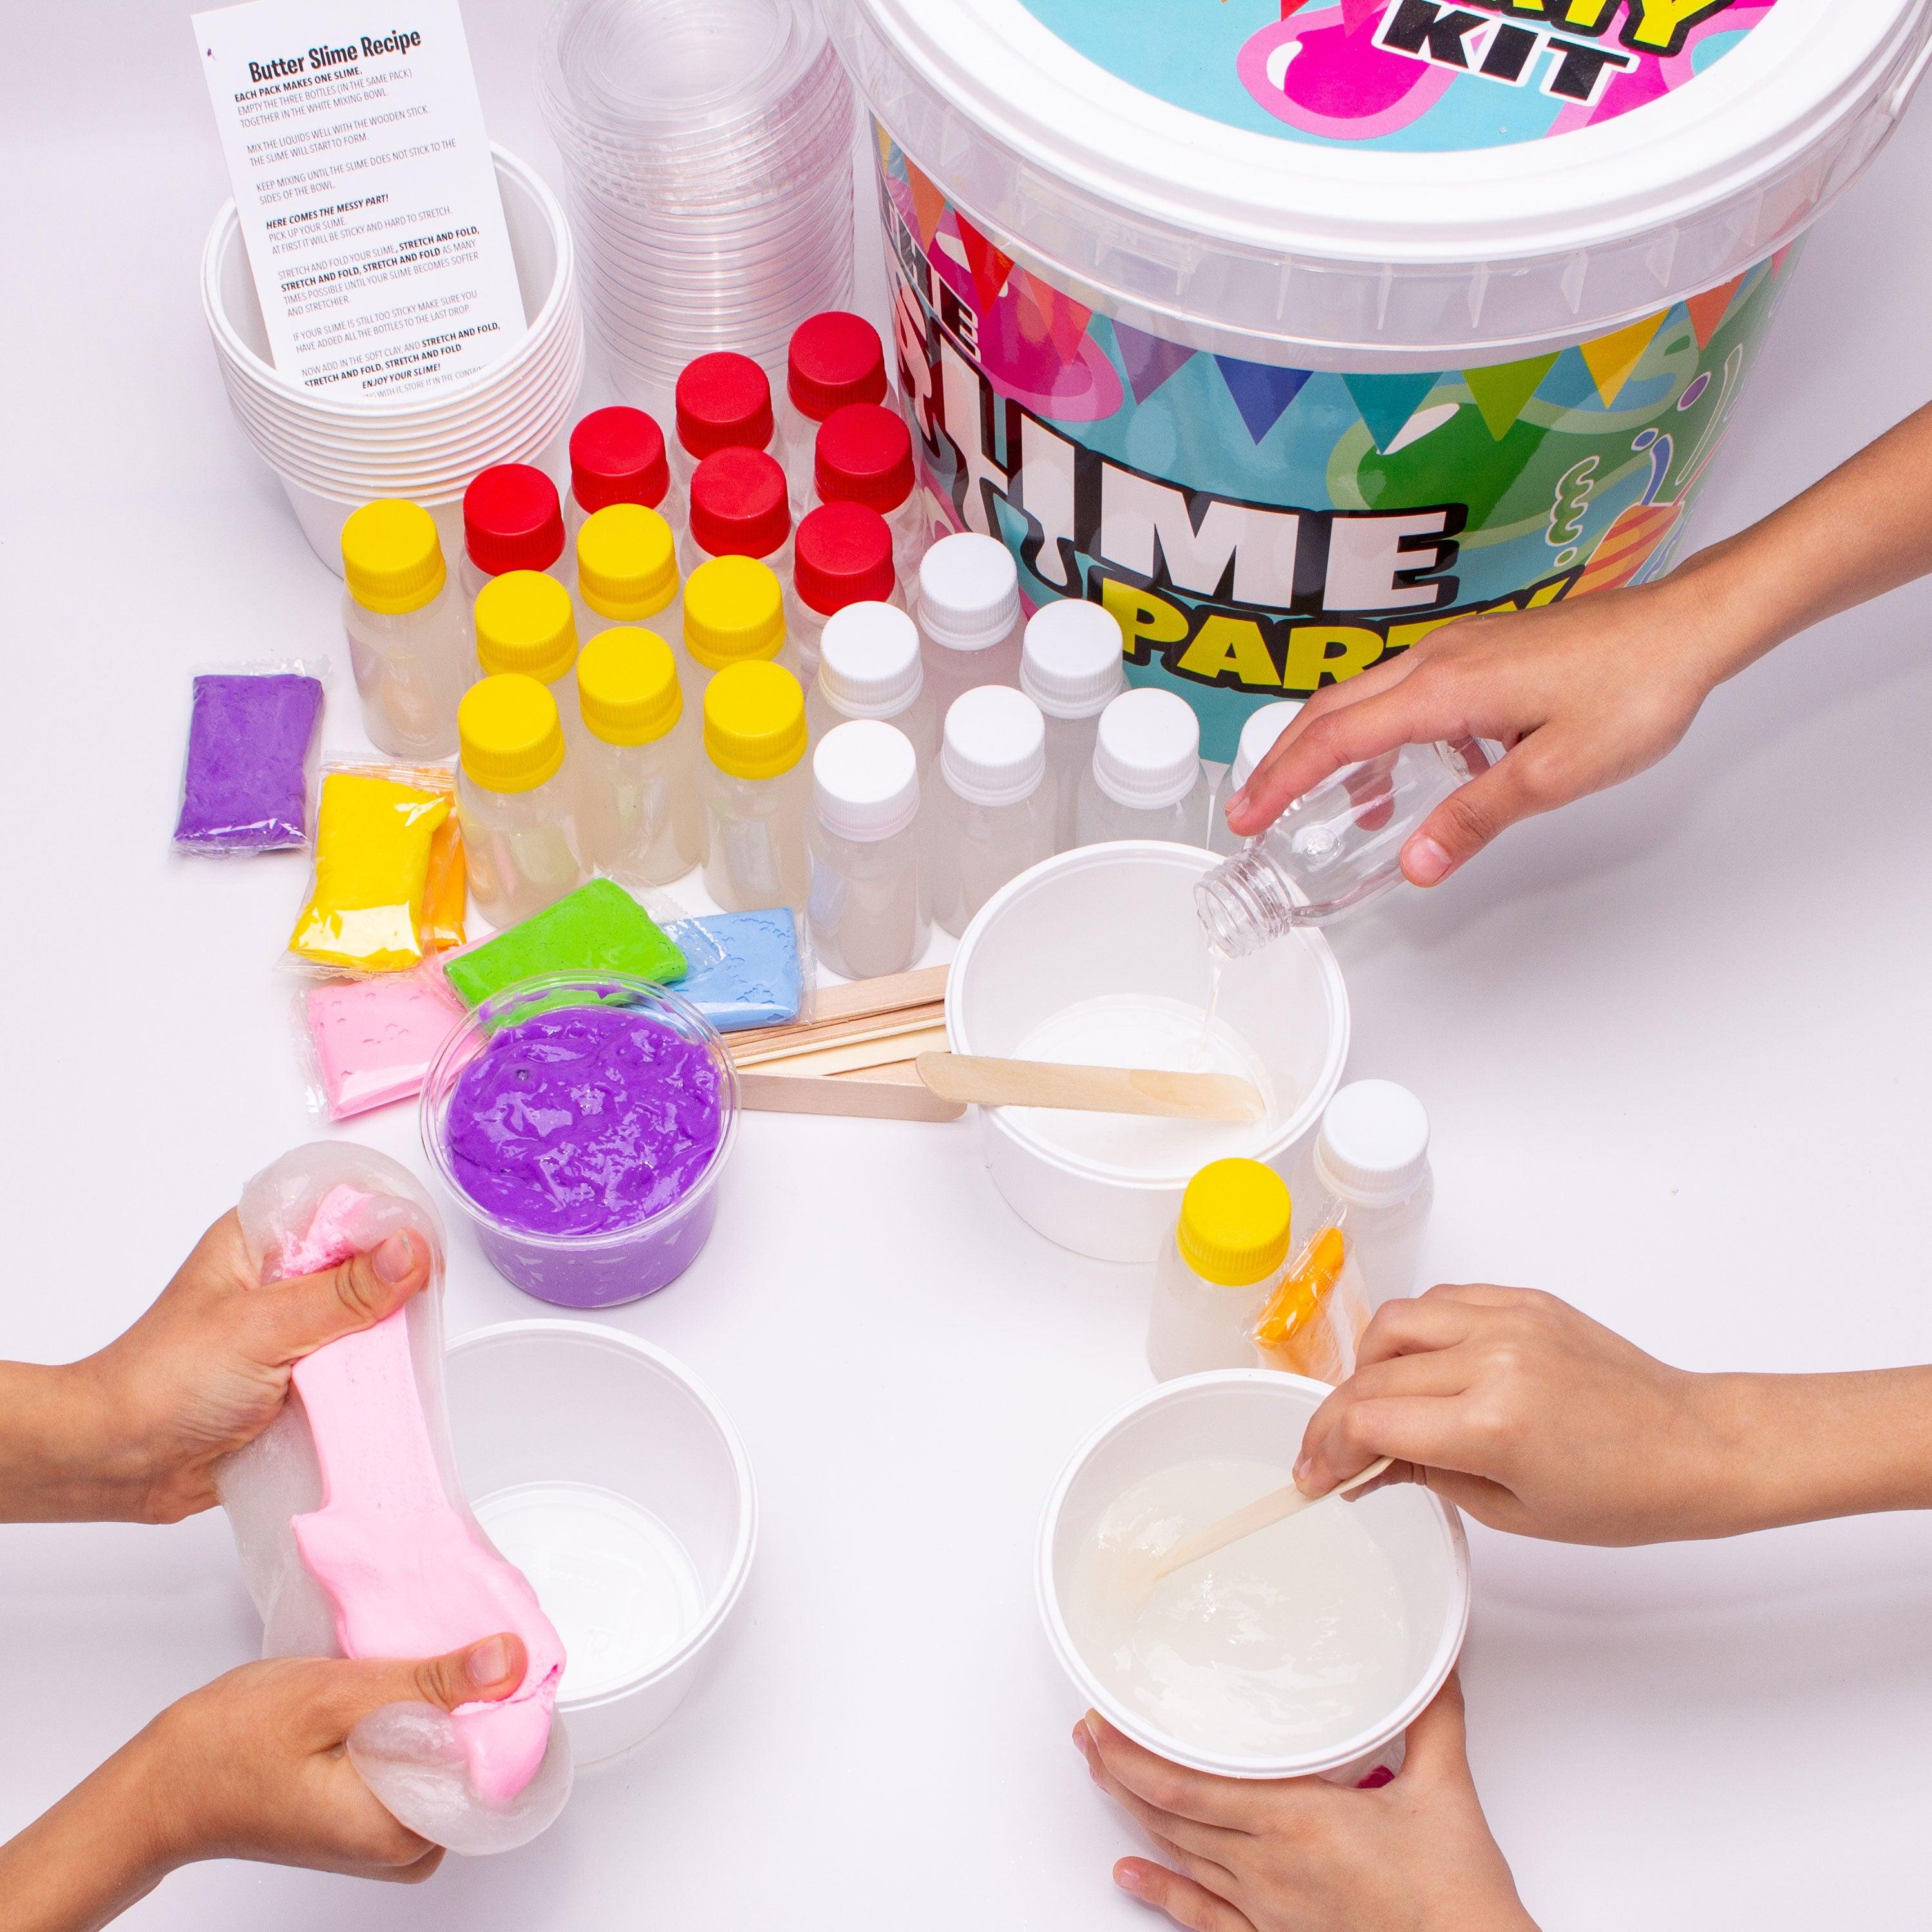 The Party Slime Kit - Ourkids - Slime Kit